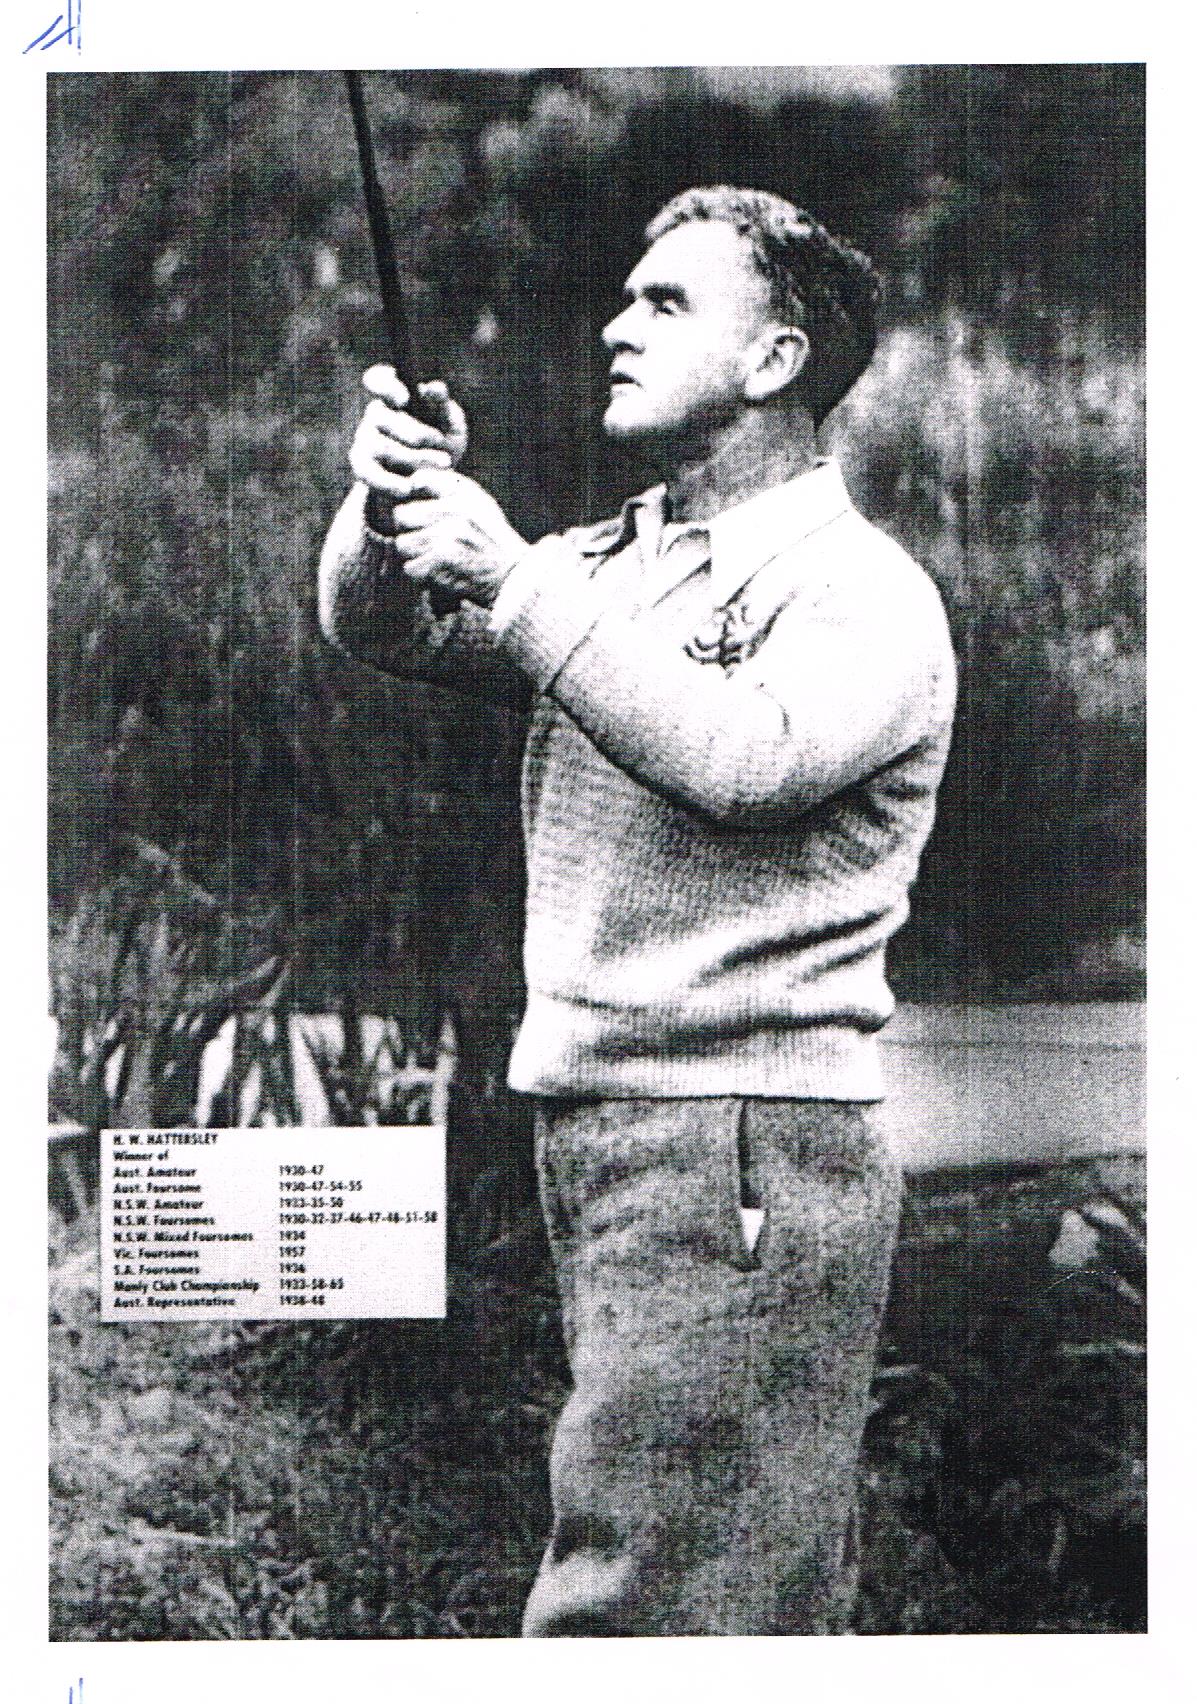 Harry Hattersley at Manly Golf Club